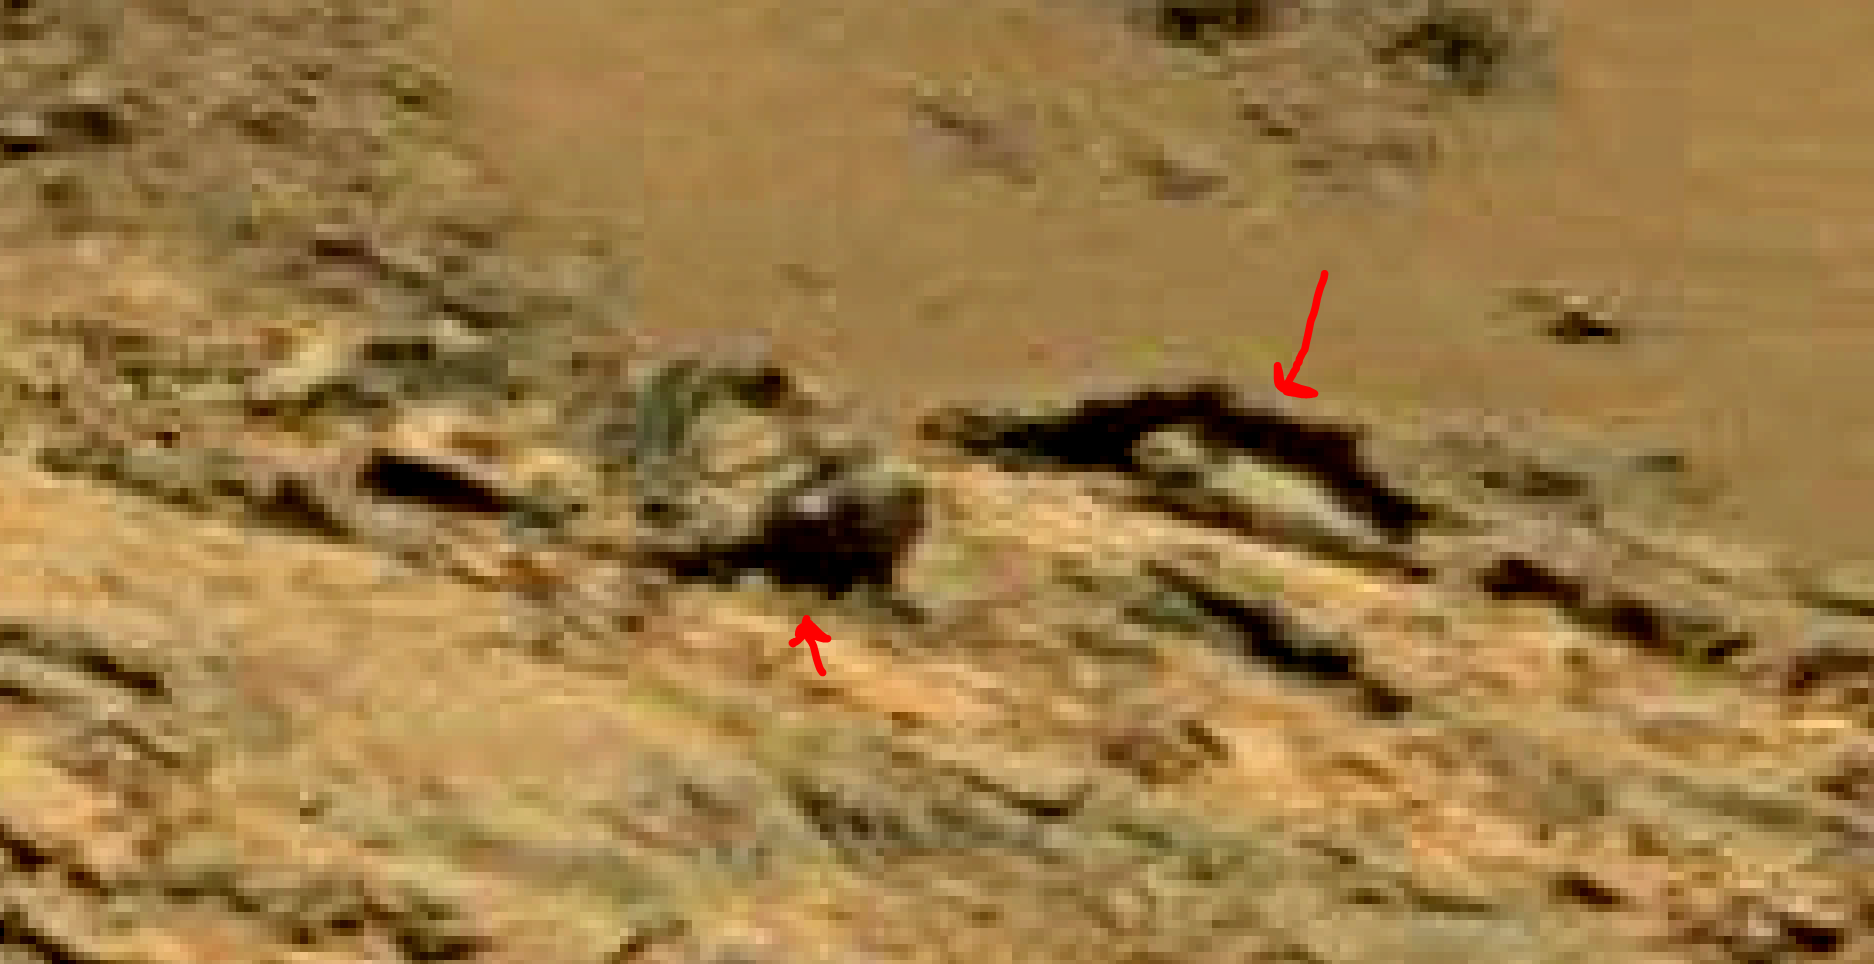 mars sol 1353 anomaly-artifacts 74 was life on mars